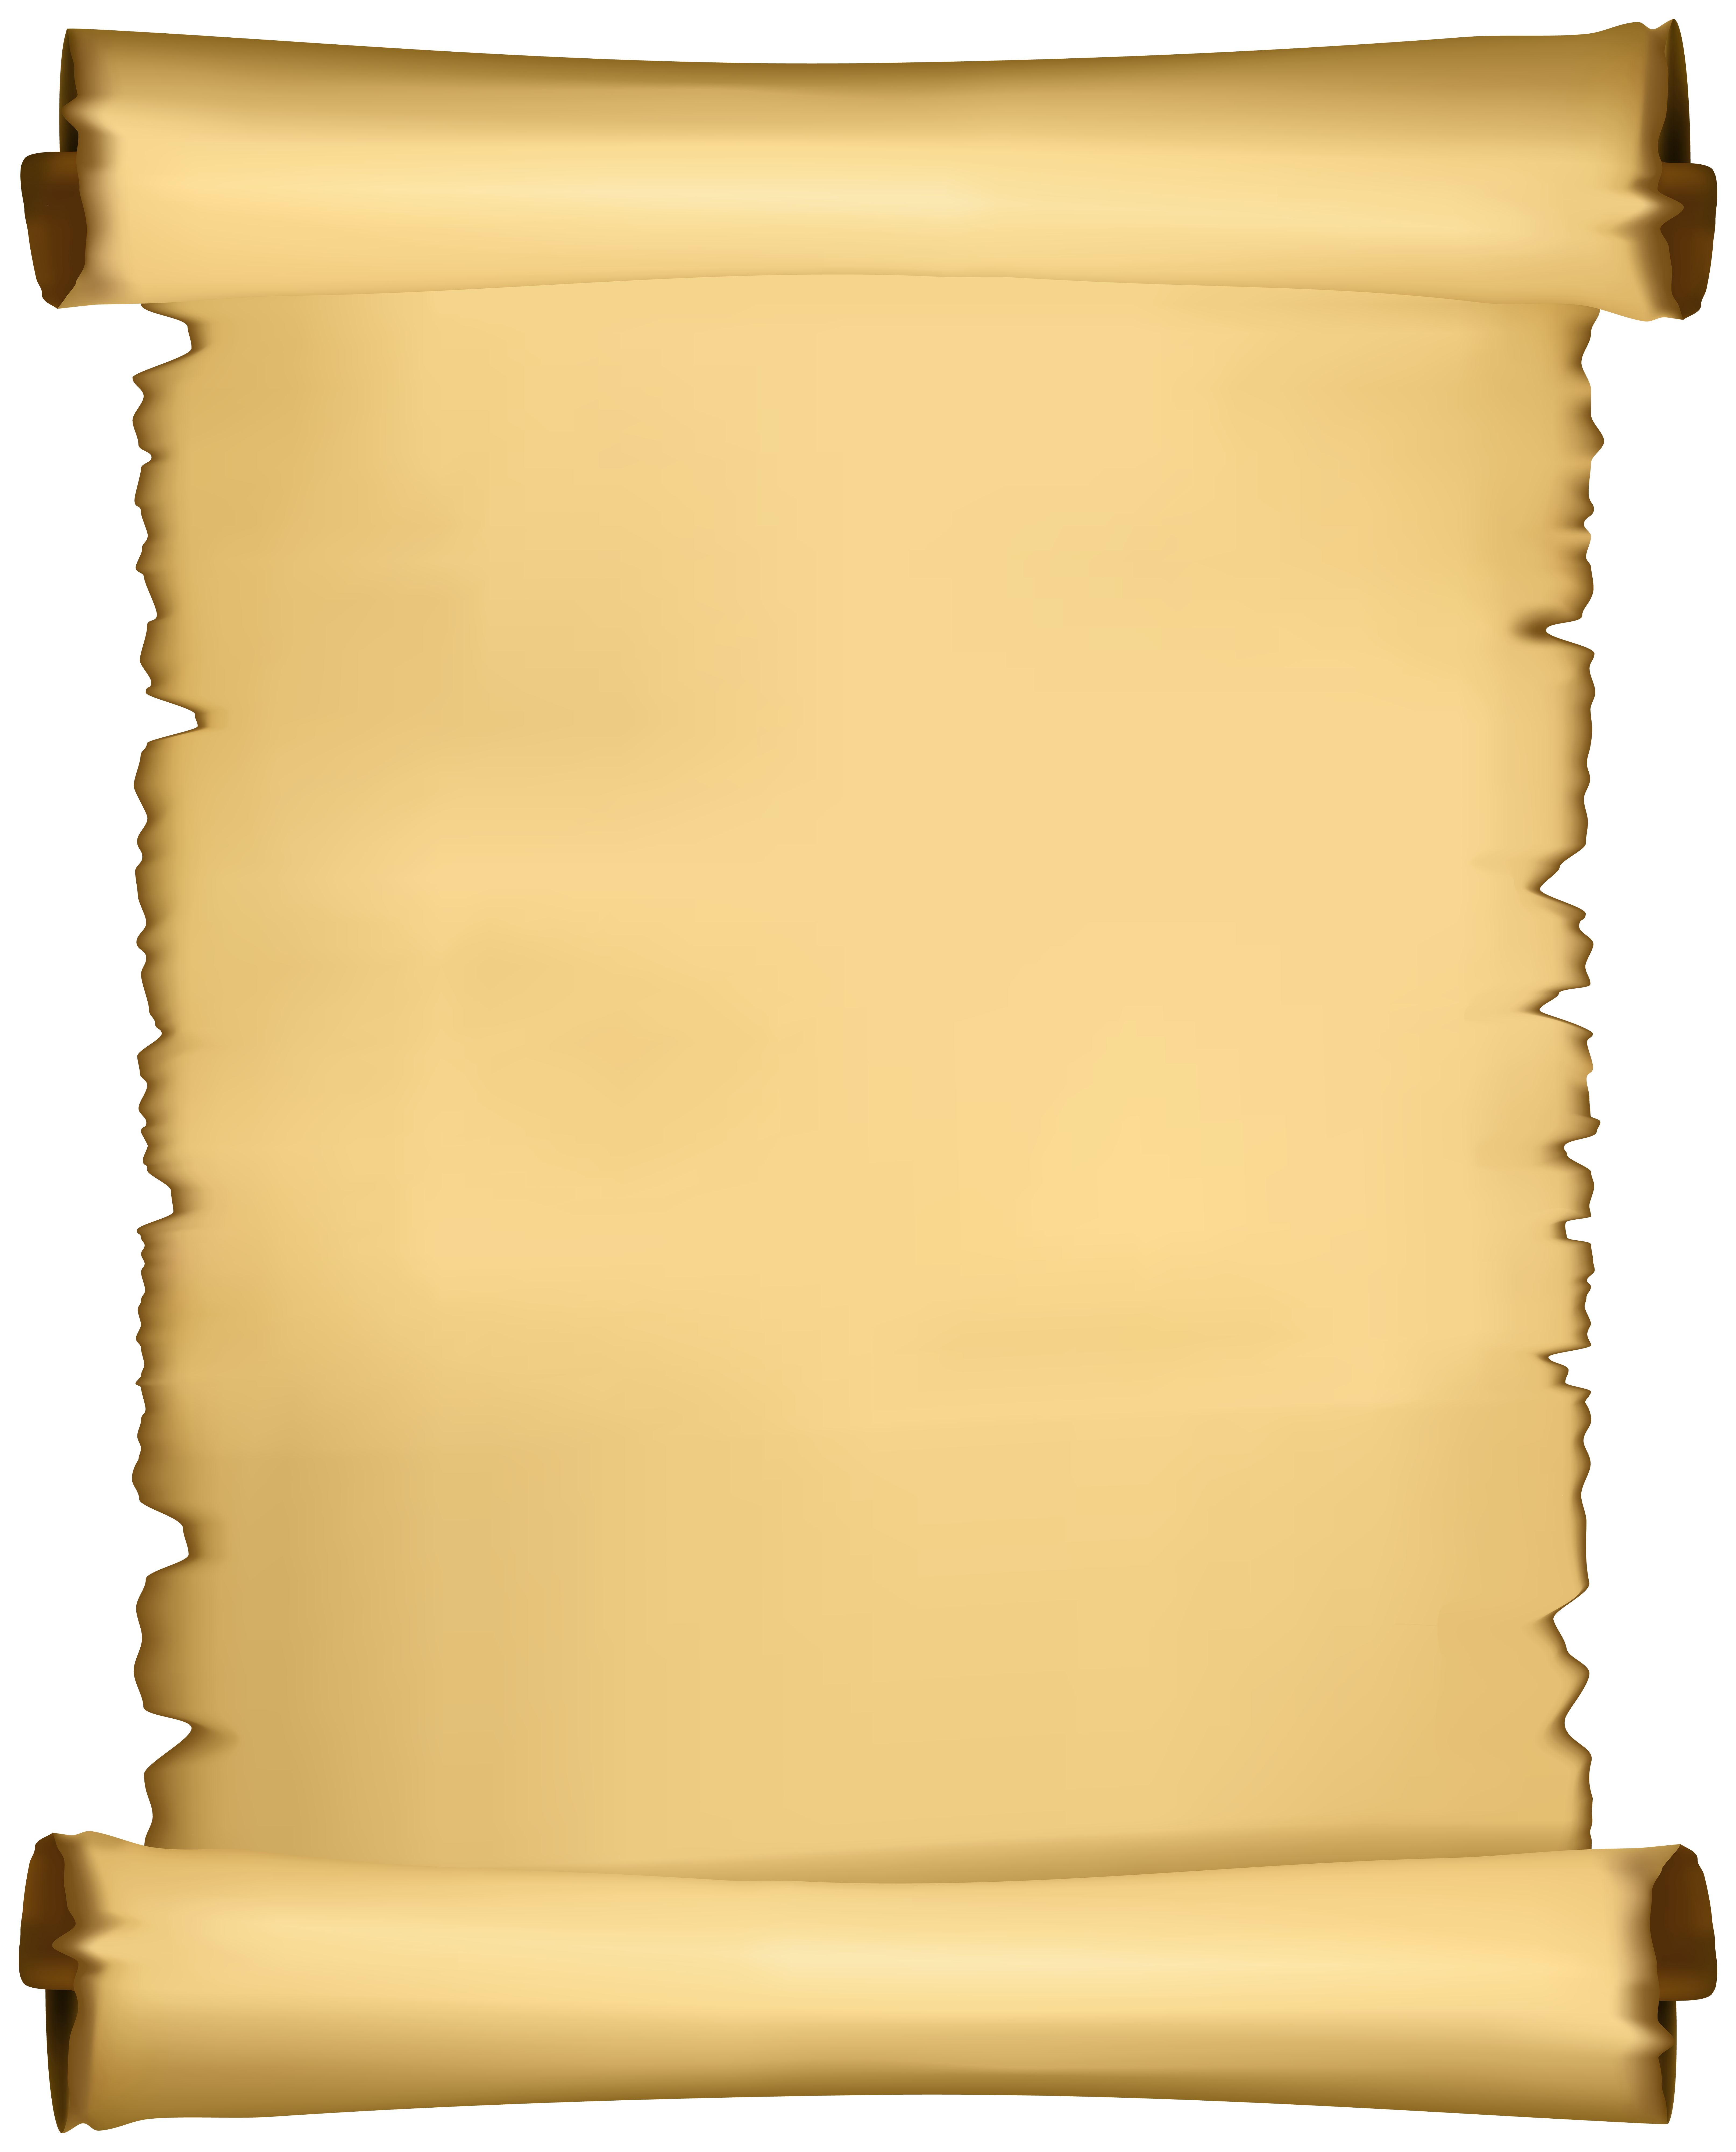 scrolls clipart png